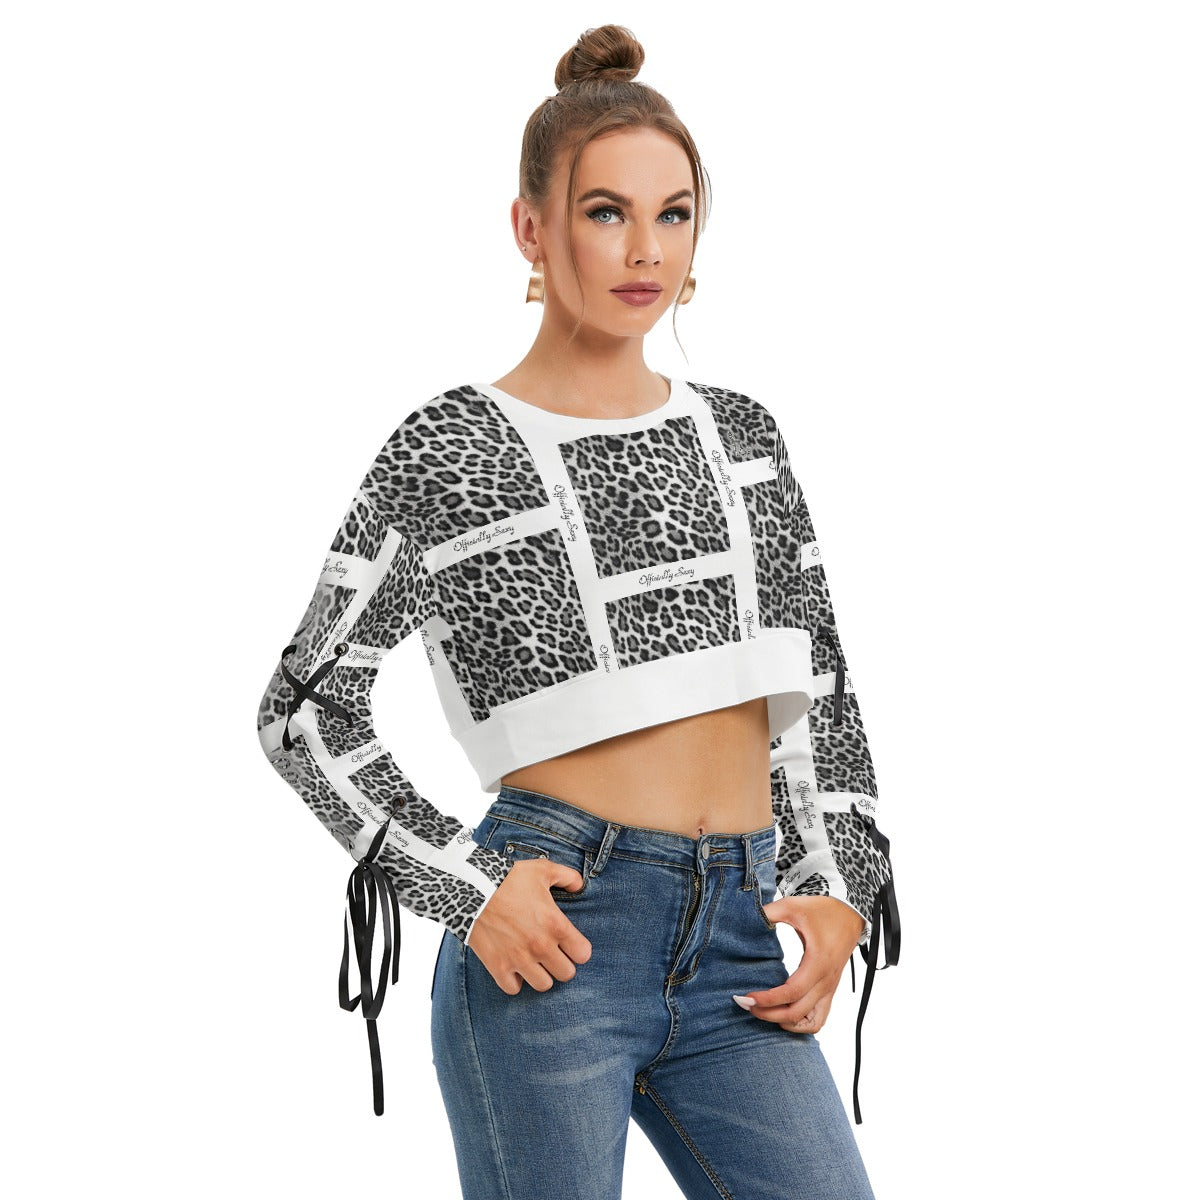 Officially Sexy Snow Leopard Print Collection Women's AOLP White Pattern Cropped Sweatshirt With Long Lace up Sleeves (English) 2